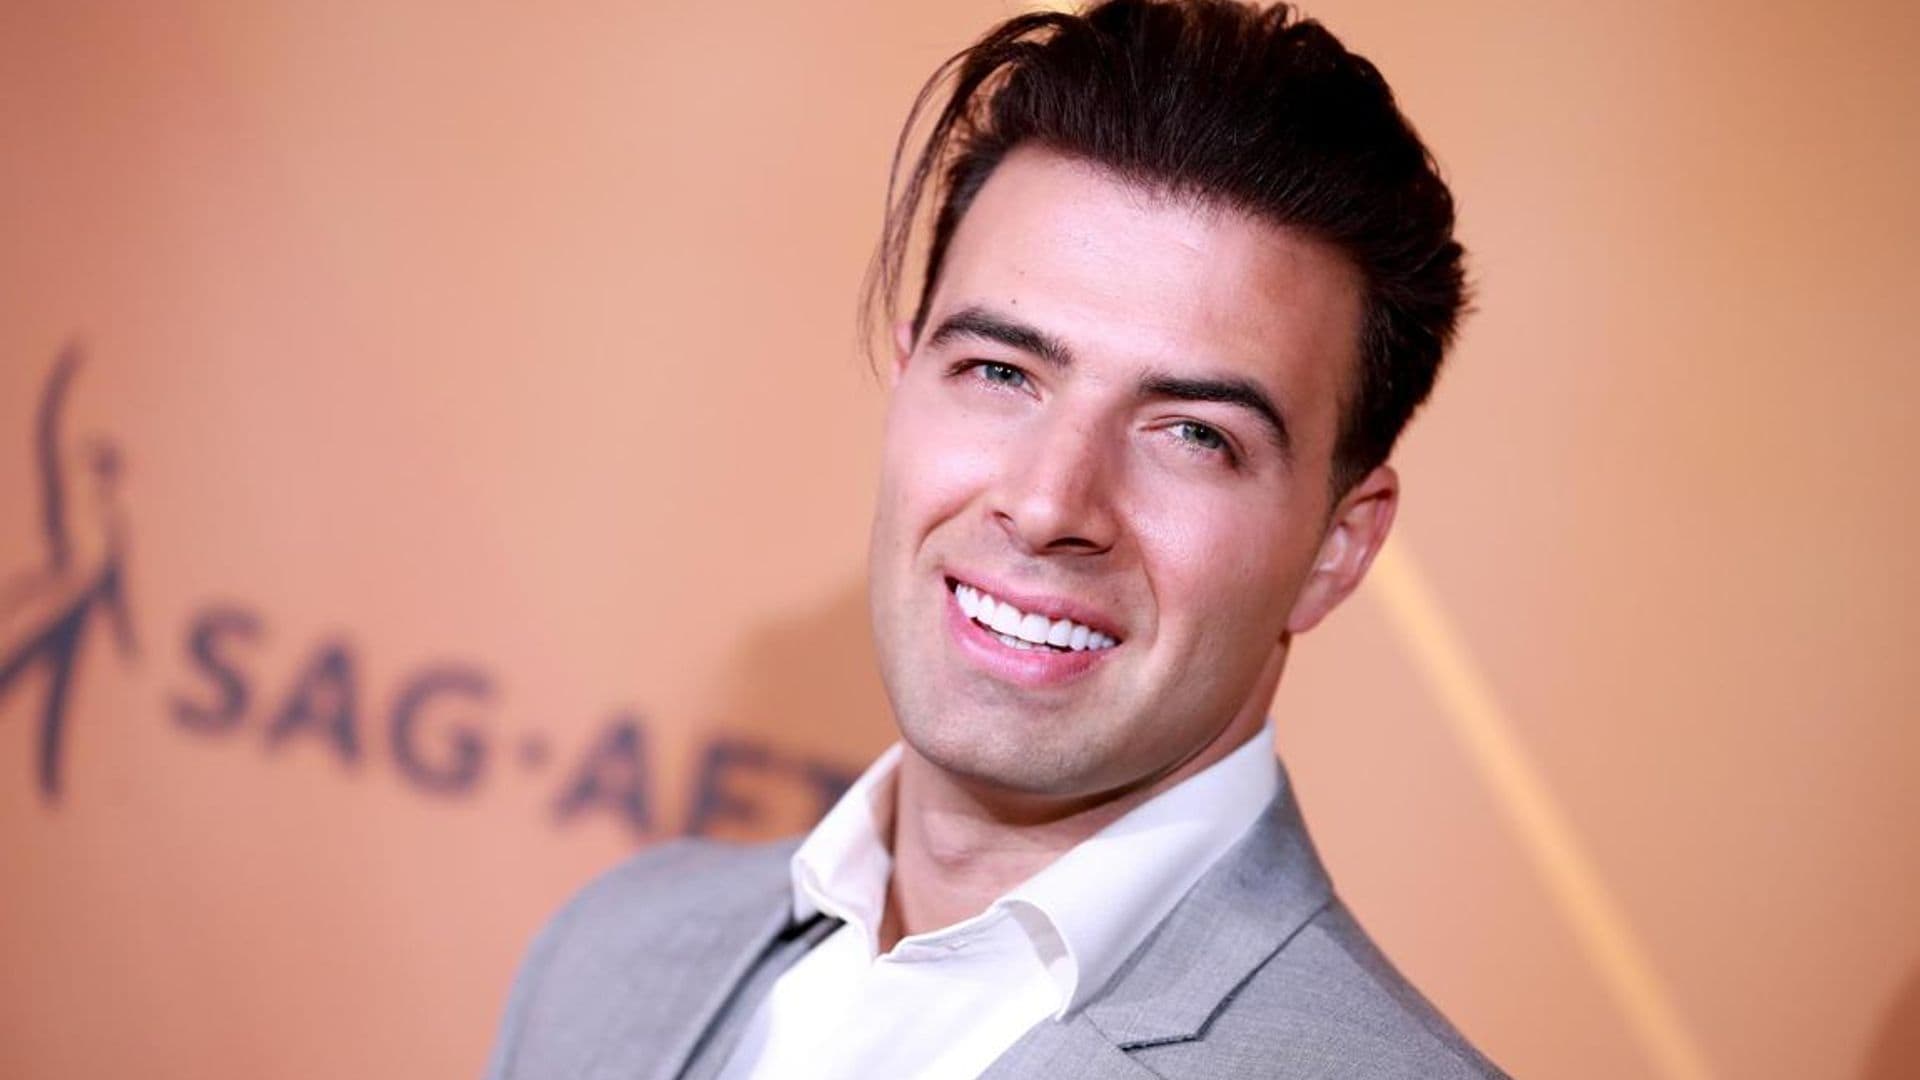 Jencarlos Canela was once headlocked by Mario Lopez and more of the Netflix star’s latest adventures